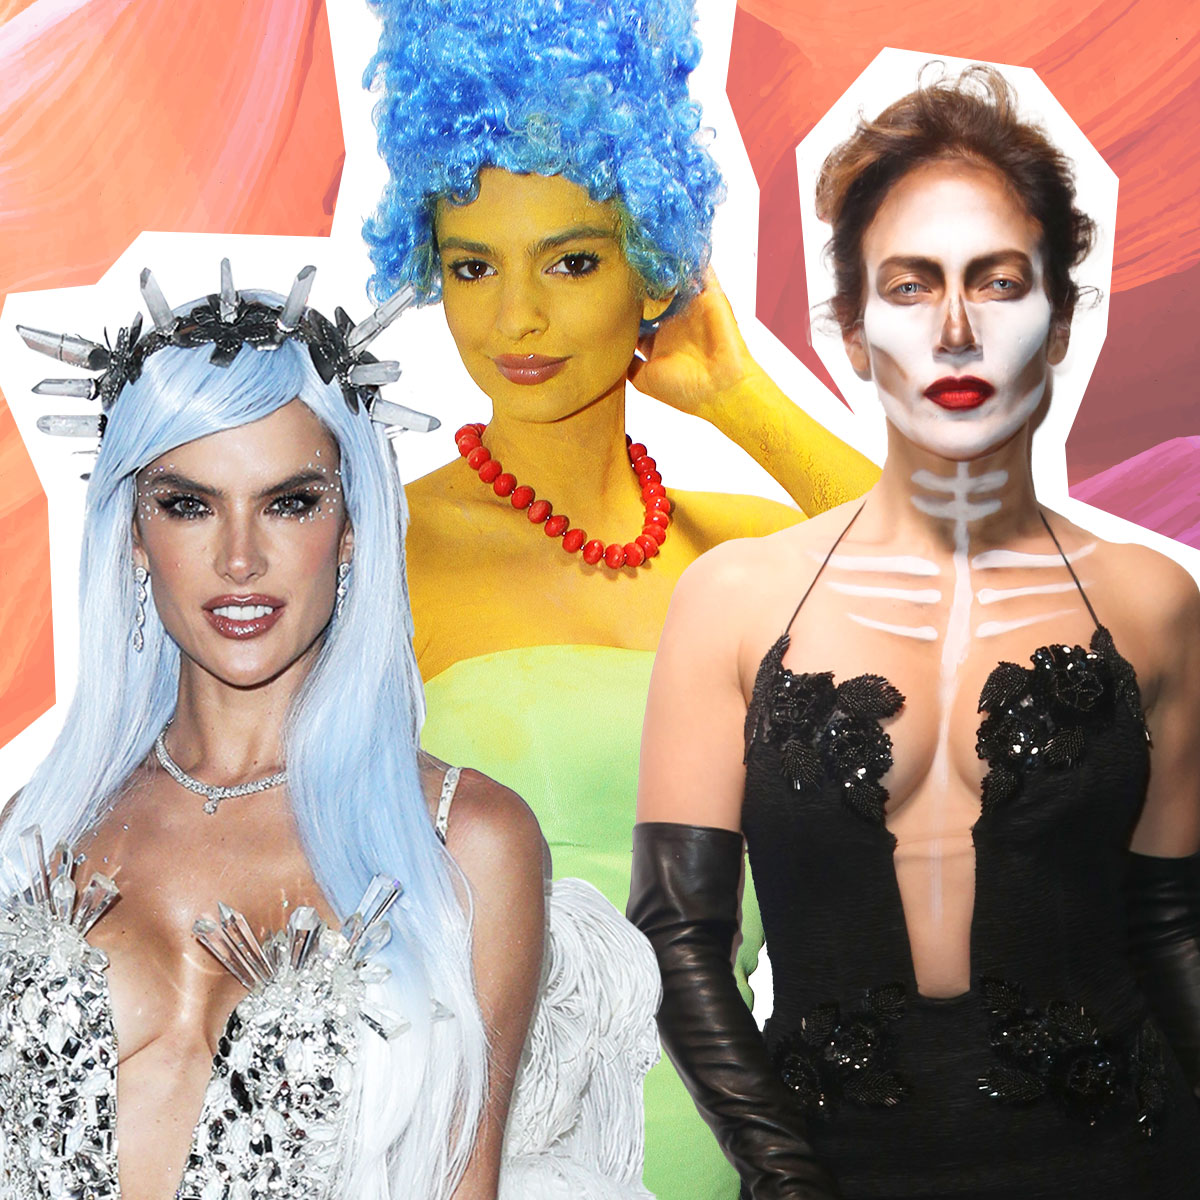 Trendy Adult Halloween Costumes Inspired by Celebs